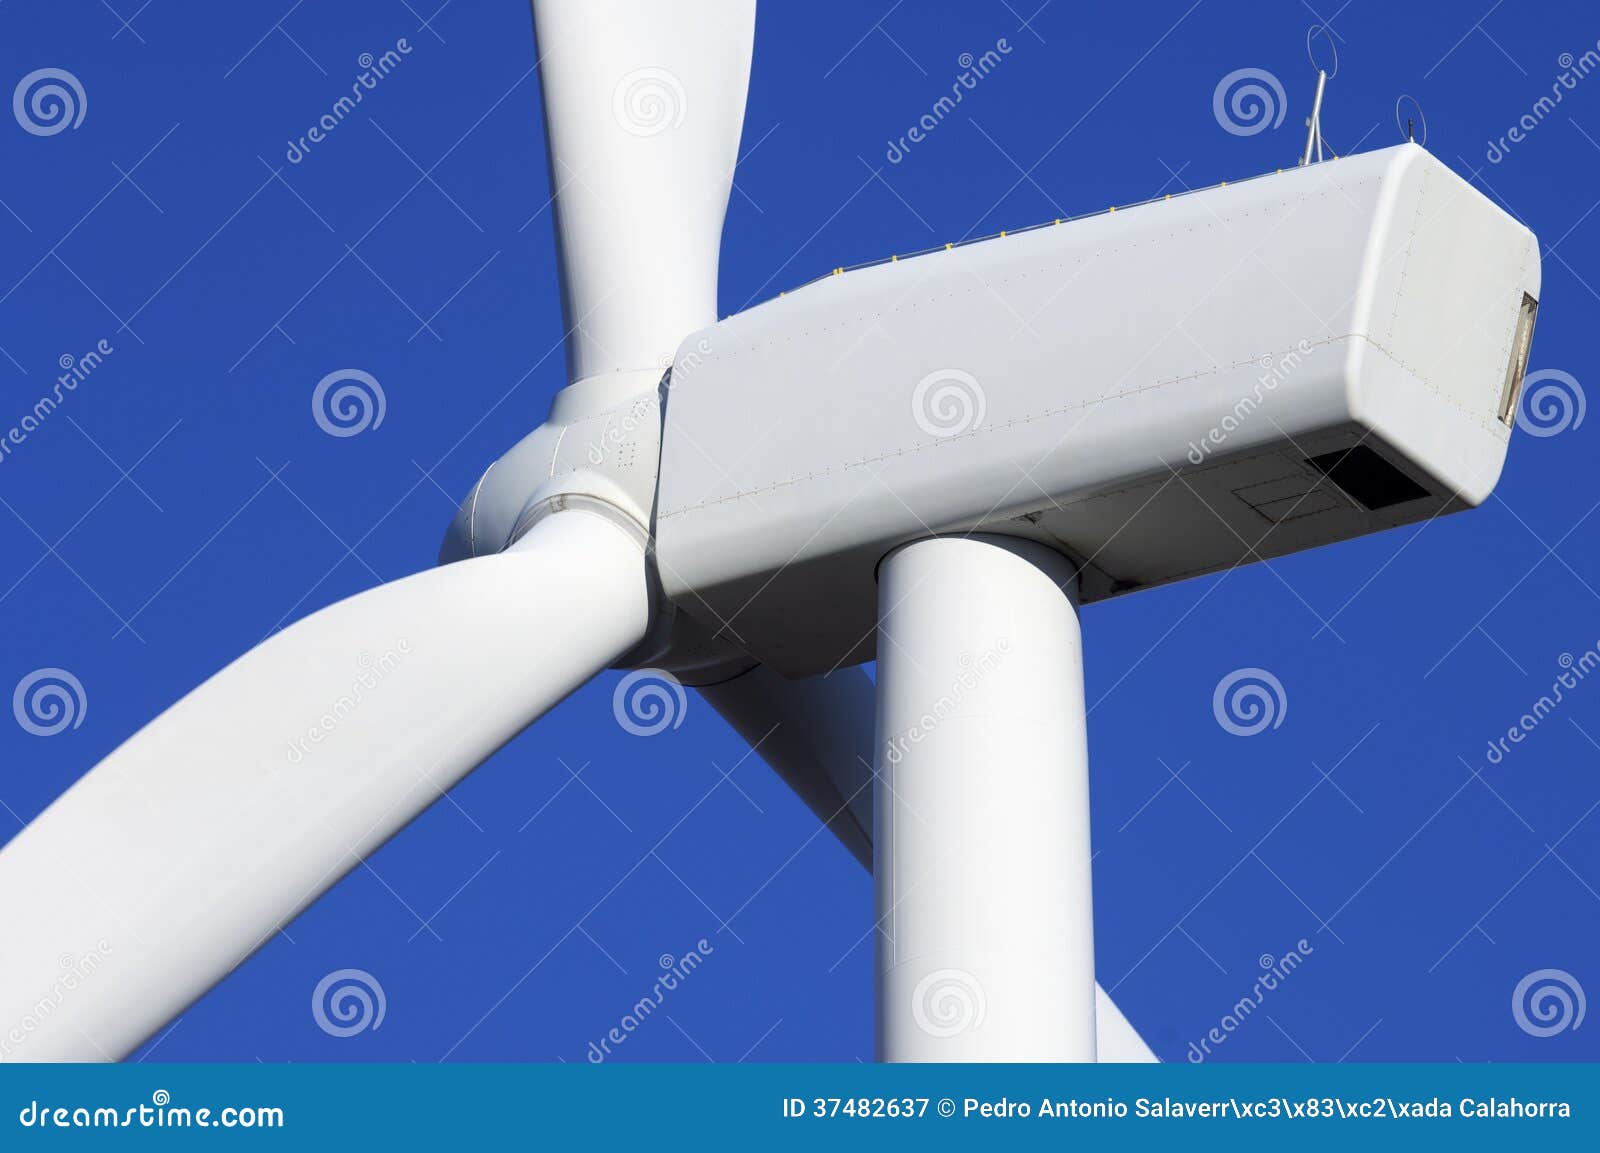 Windmill Royalty Free Stock Photography - Image: 37482637